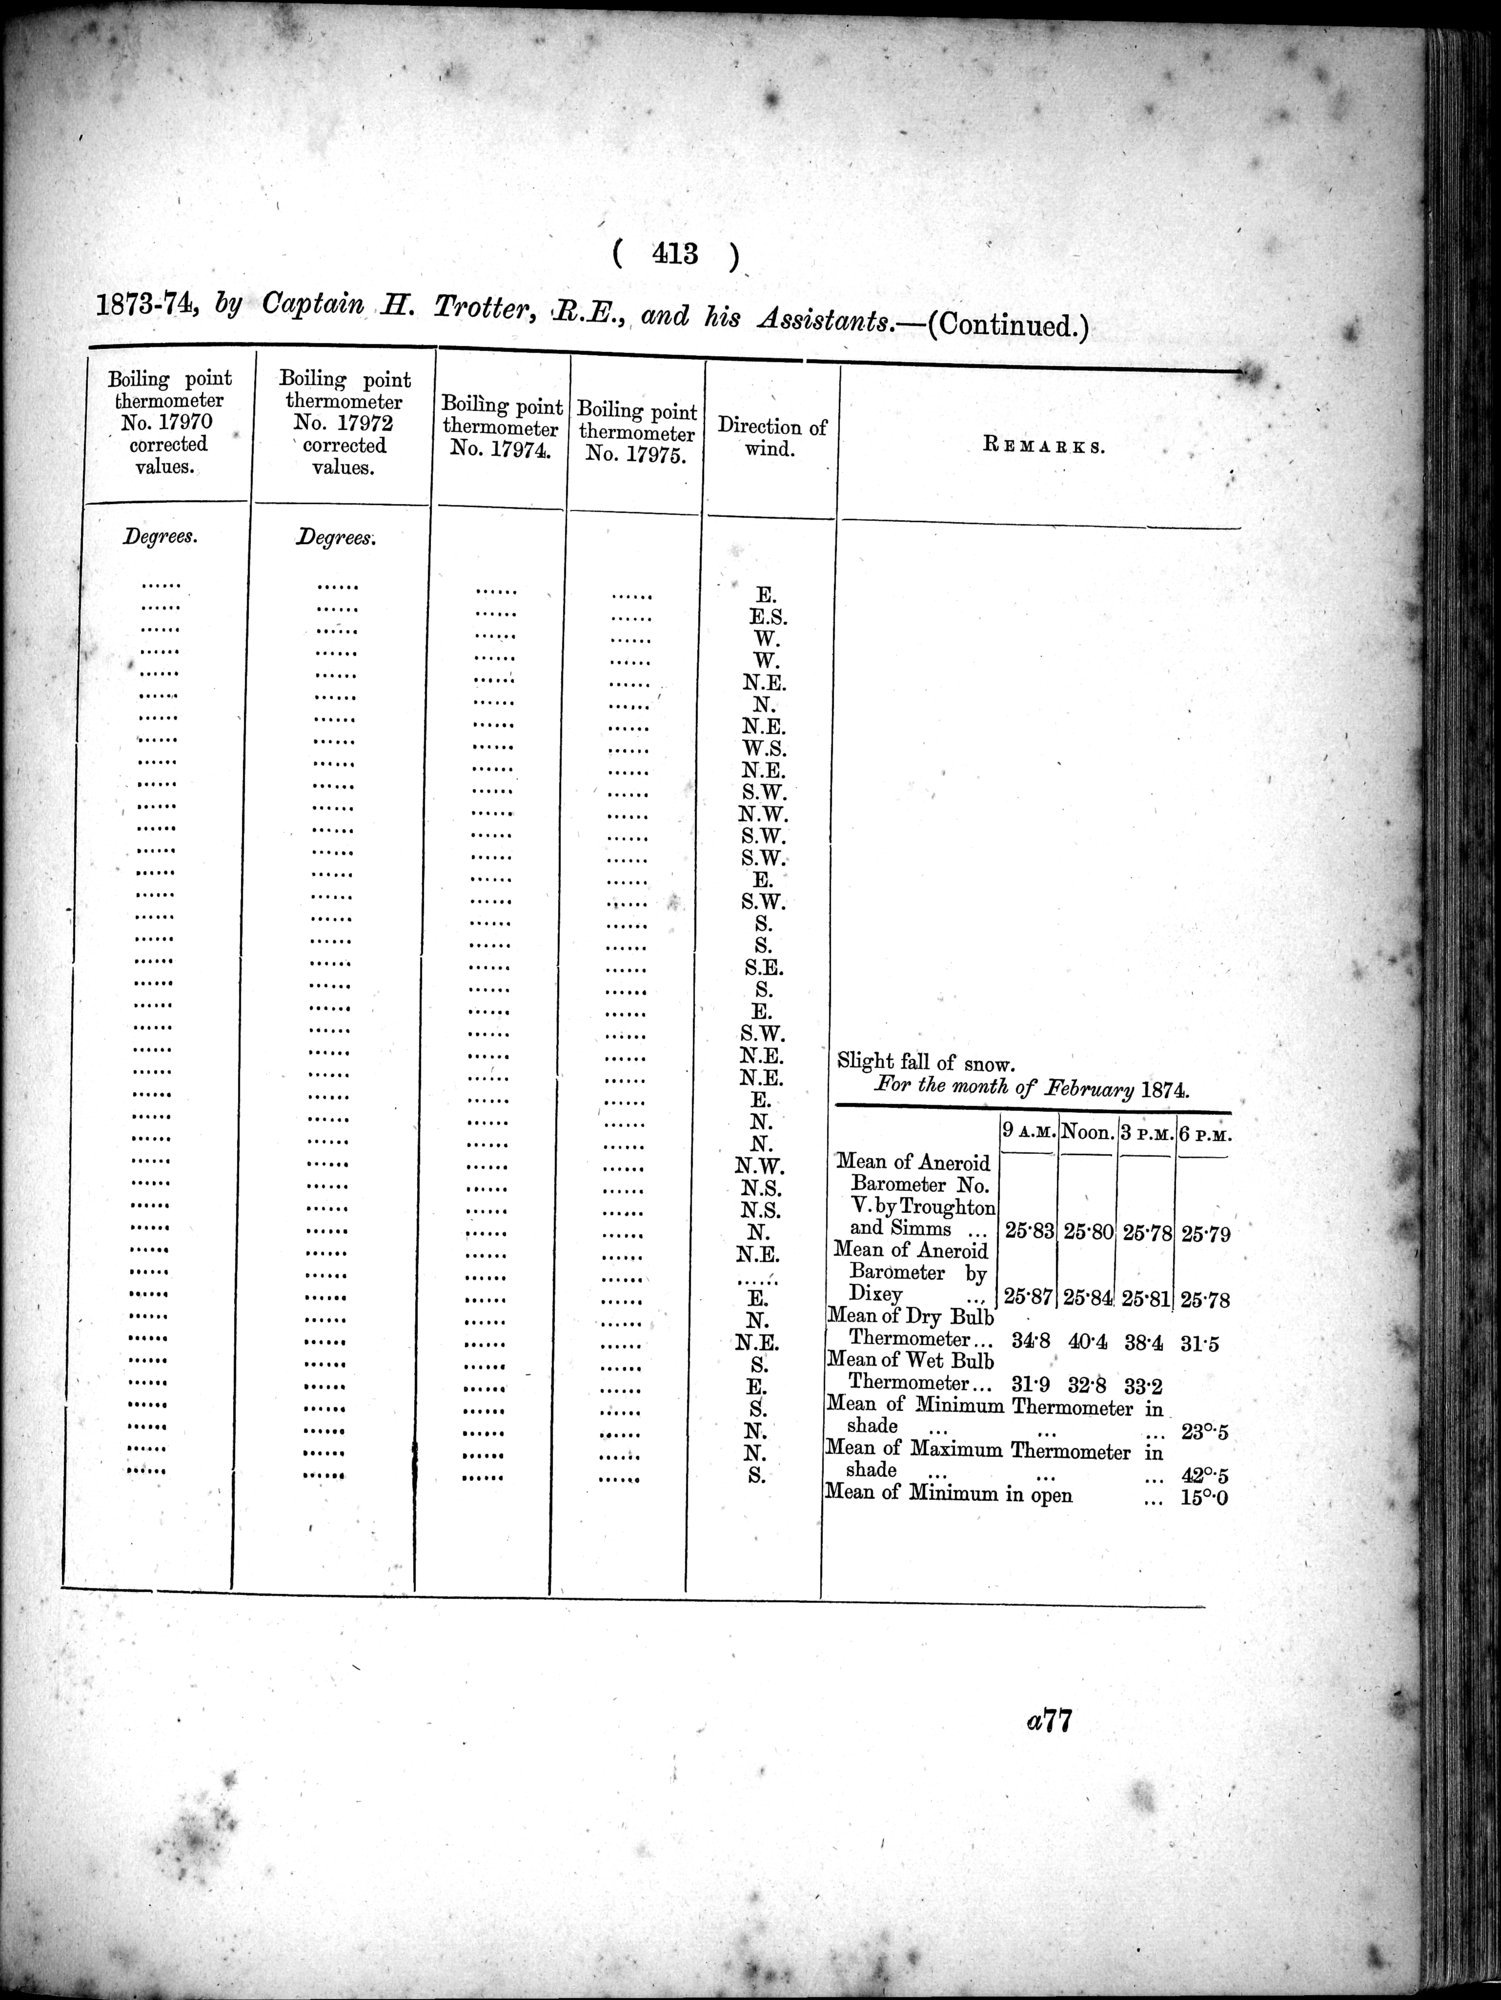 Report of a Mission to Yarkund in 1873 : vol.1 / Page 547 (Grayscale High Resolution Image)